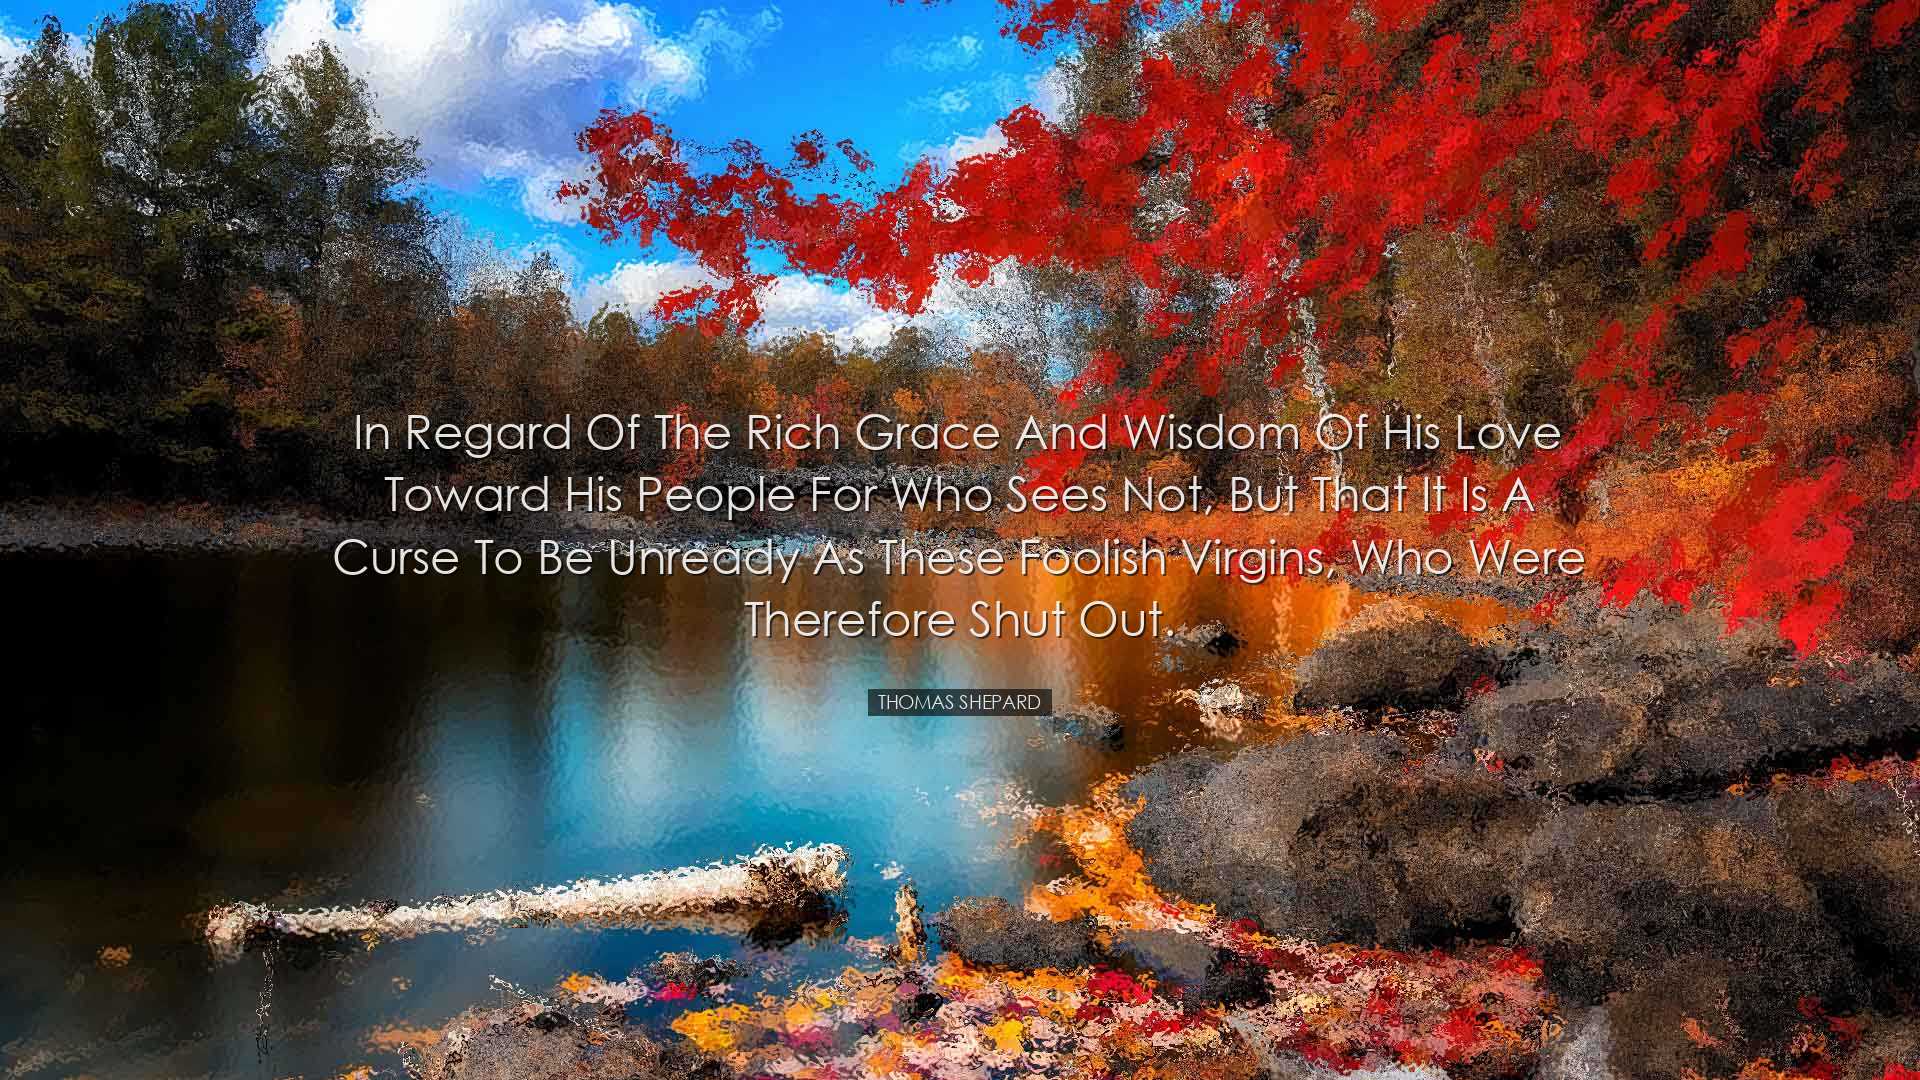 In regard of the rich grace and wisdom of his love toward his peop